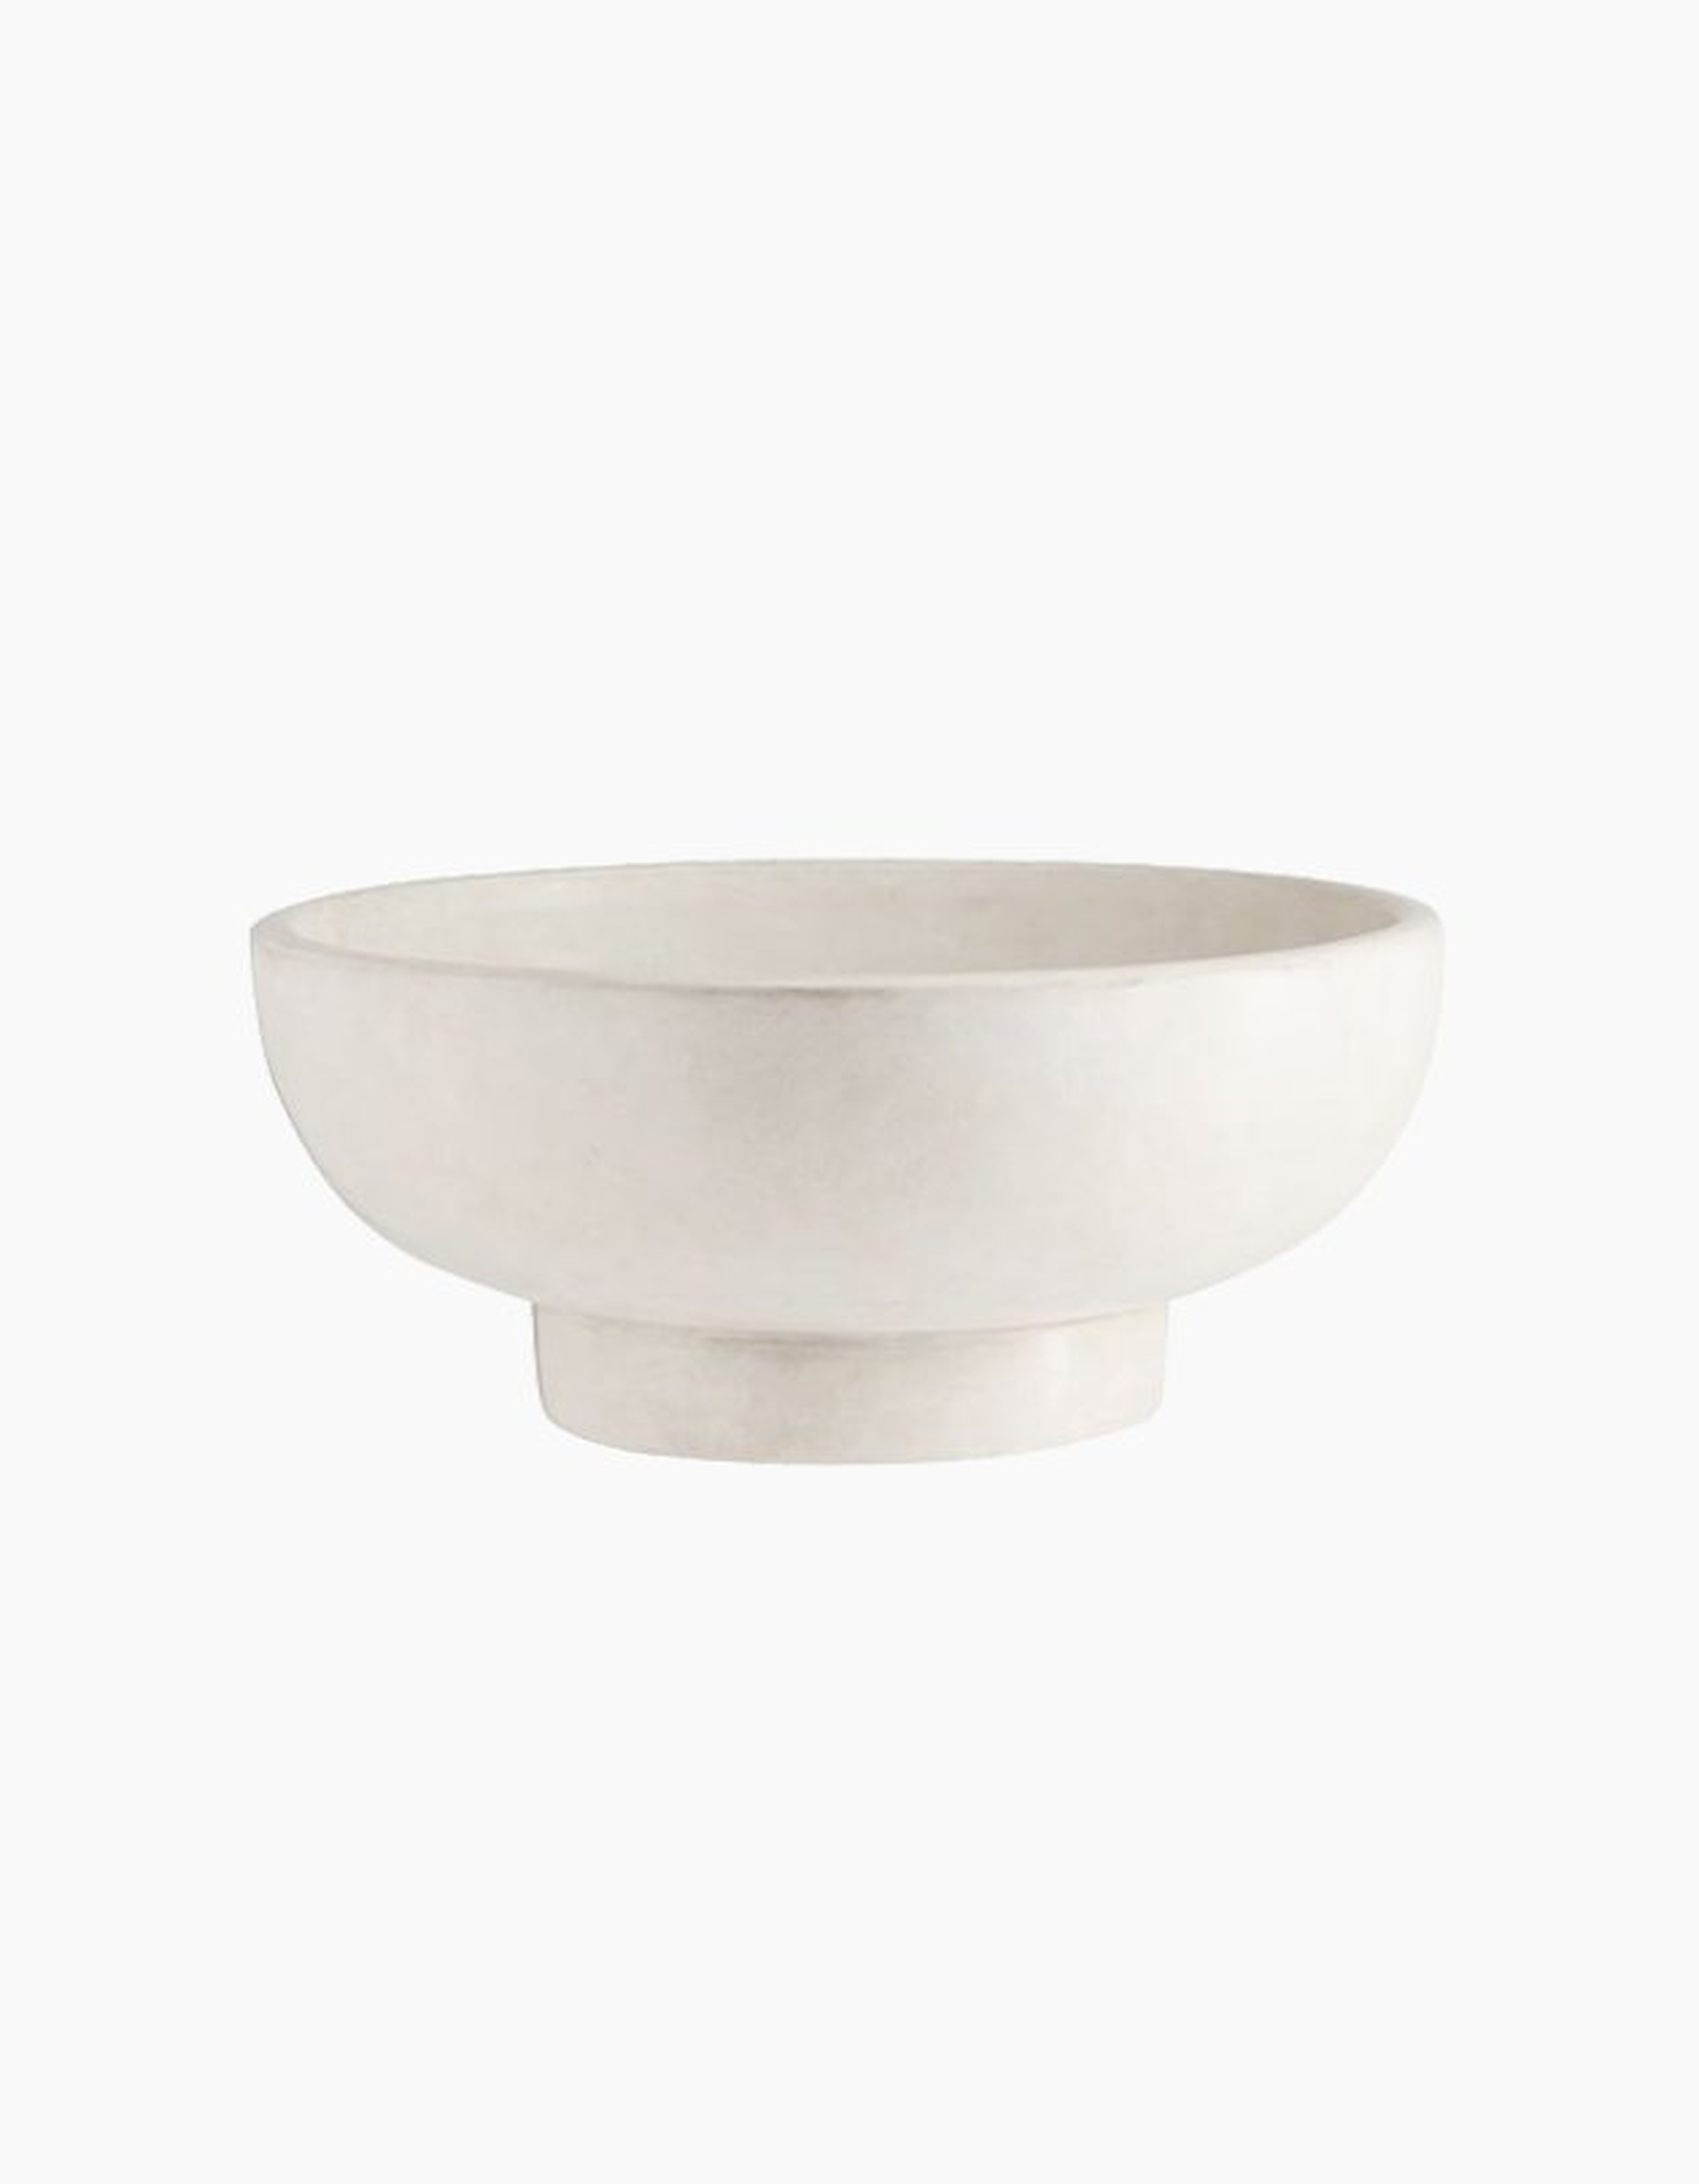 Orion Handcrafted Terracotta Bowl, Small, White - Pottery Barn